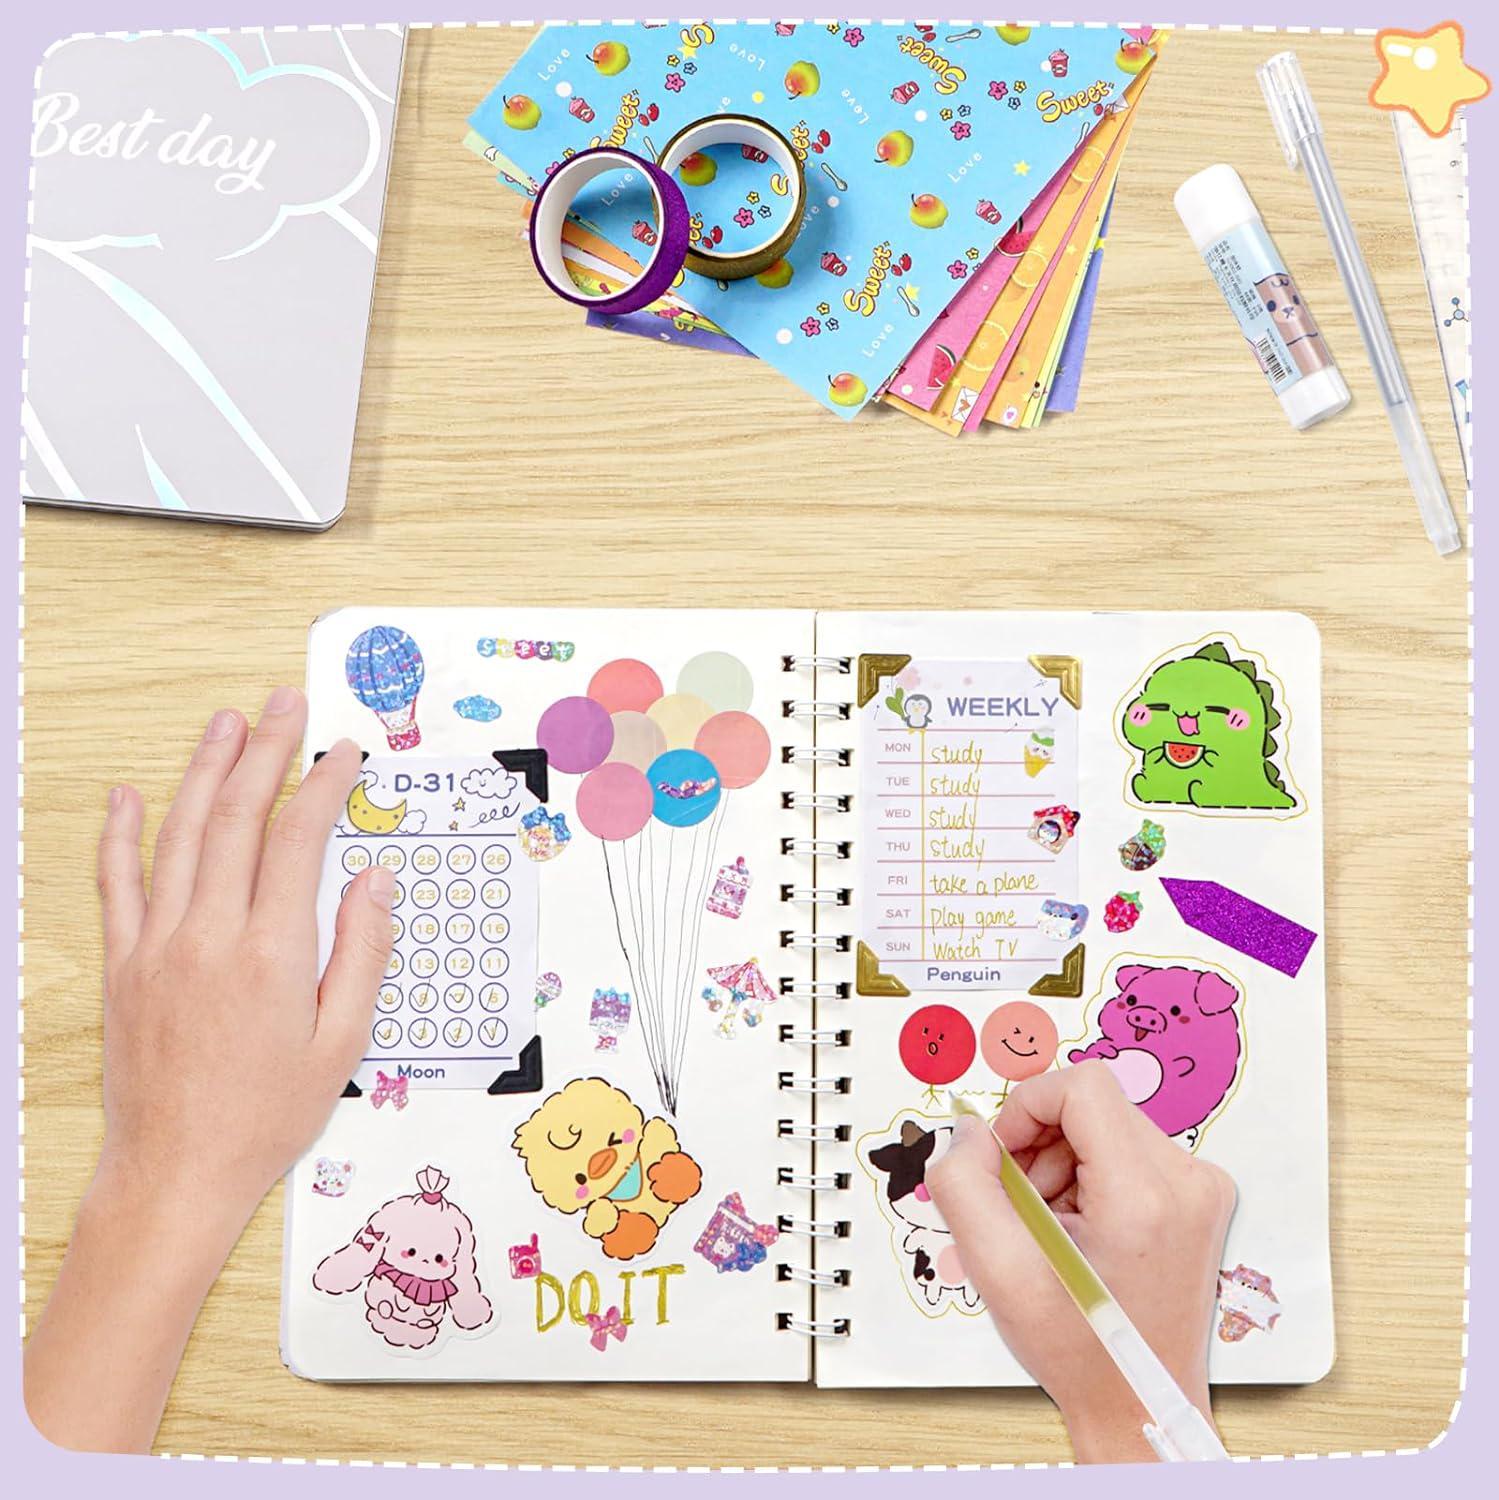  Pretty Me DIY Journal Kit for Girls - Great Gift for 8-14 Year  Old Girl - Cool Birthday Gifts Ideas for Teens - Fun, Cute Art & Crafts Kits  for Tween